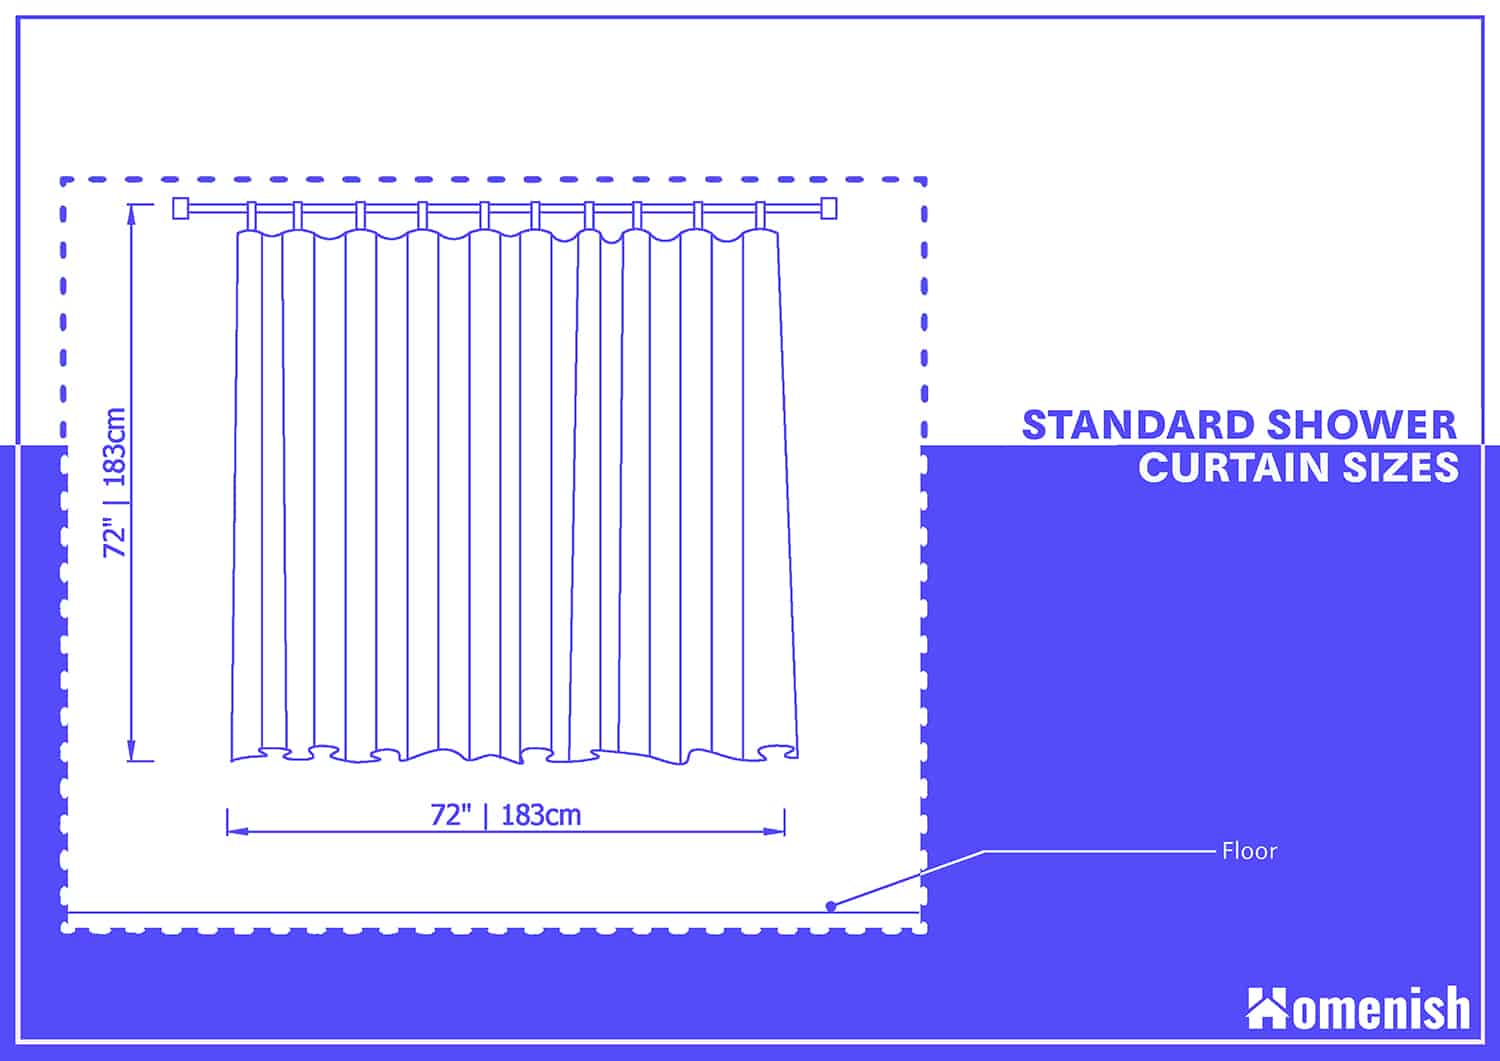 Standard Shower Curtain Size, What Is The Widest Shower Curtain Size